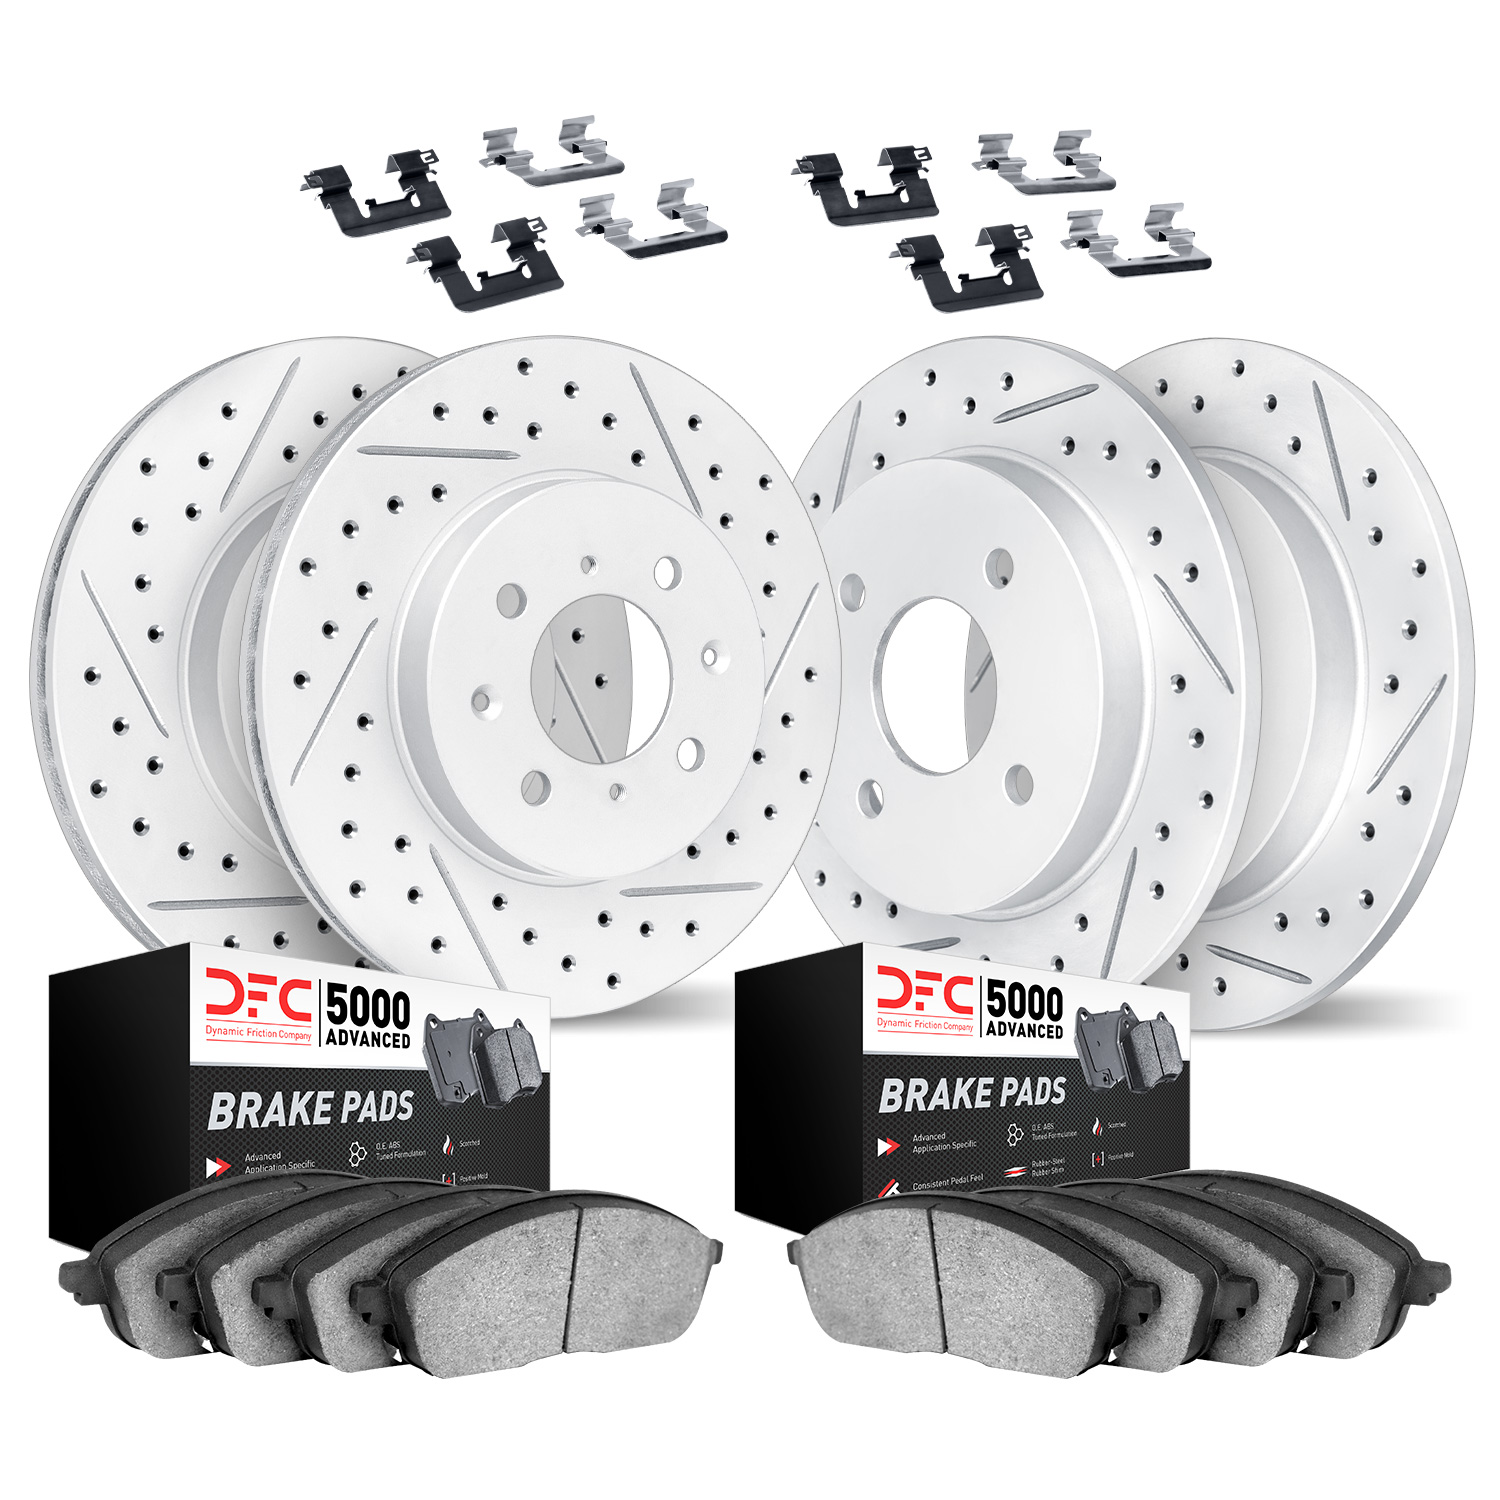 2514-47292 Geoperformance Drilled/Slotted Rotors w/5000 Advanced Brake Pads Kit & Hardware, 2014-2016 GM, Position: Front and Re